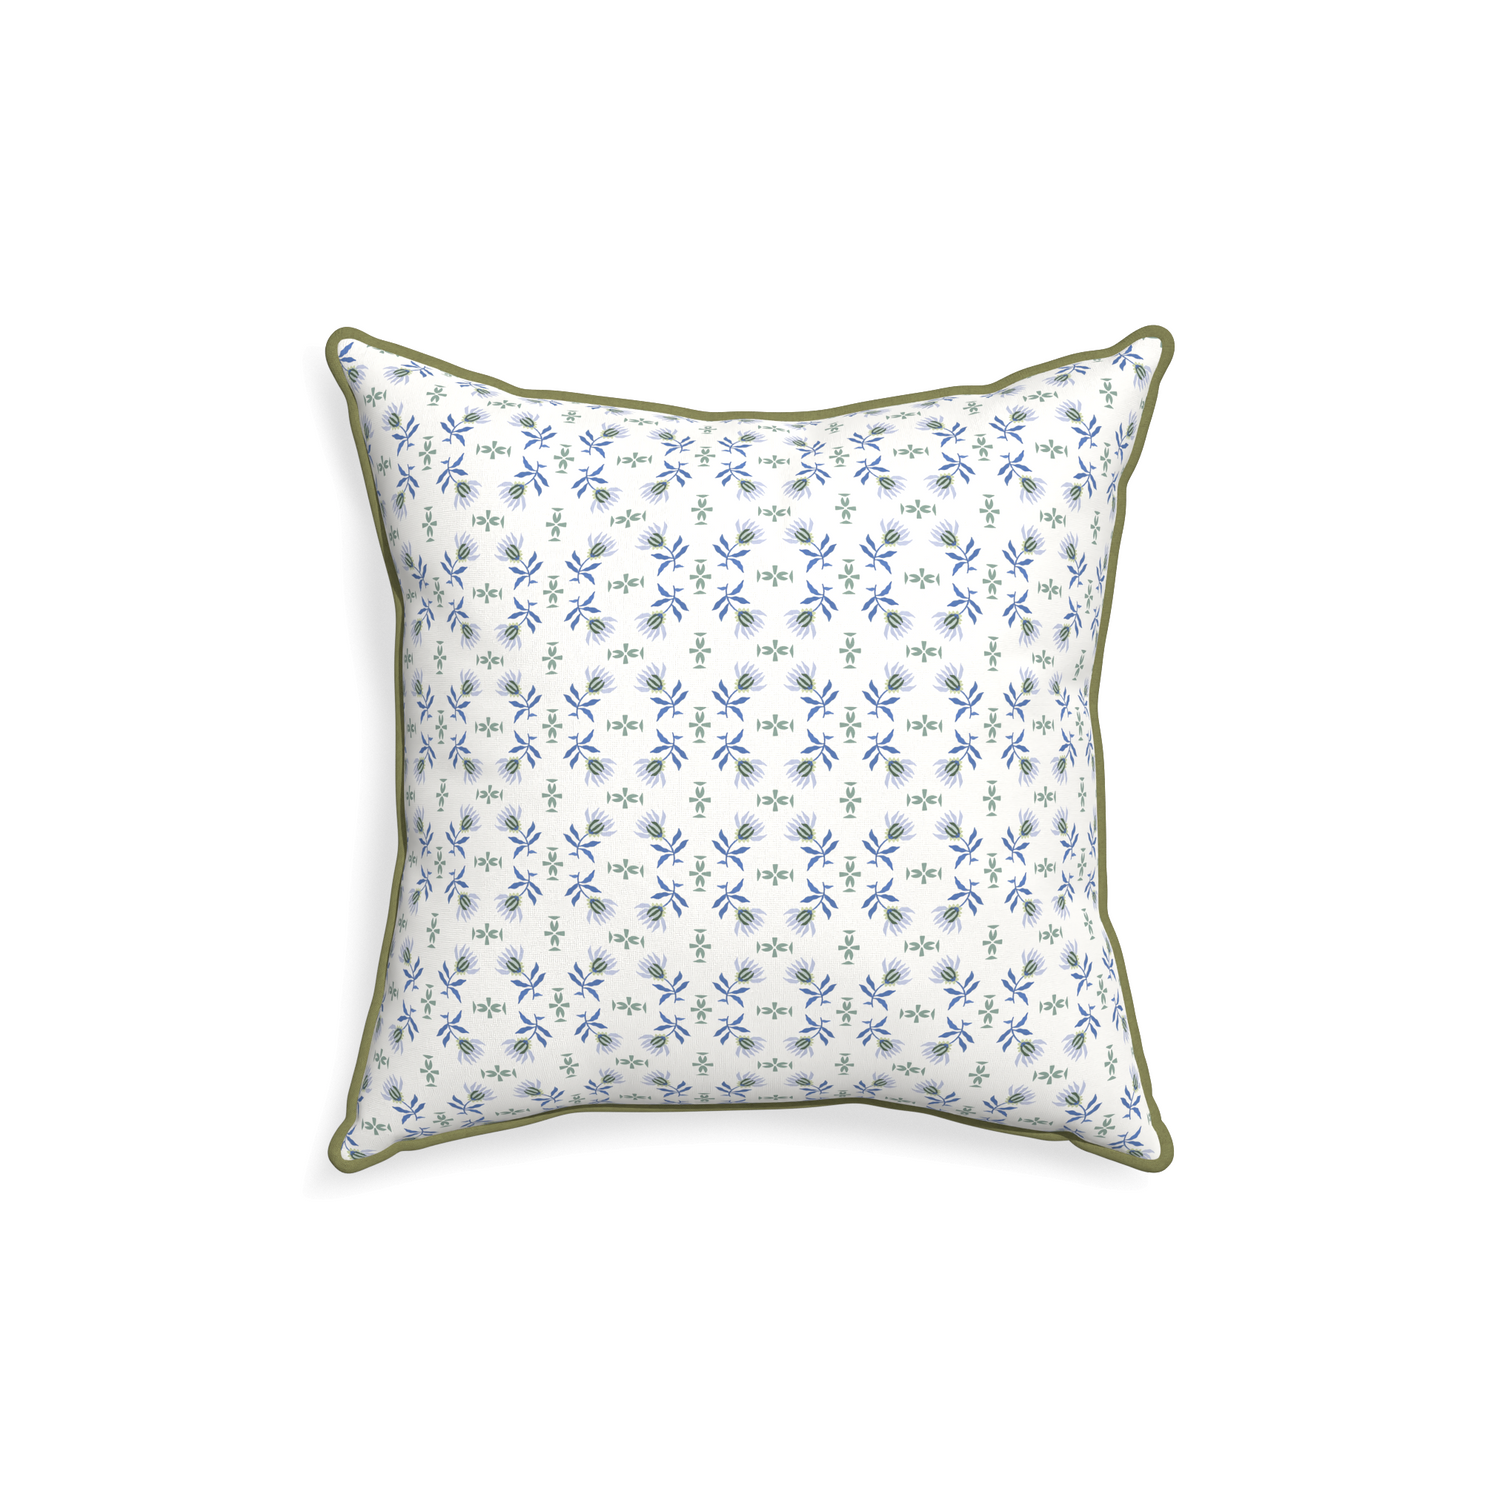 18-square lee custom blue & green floralpillow with moss piping on white background